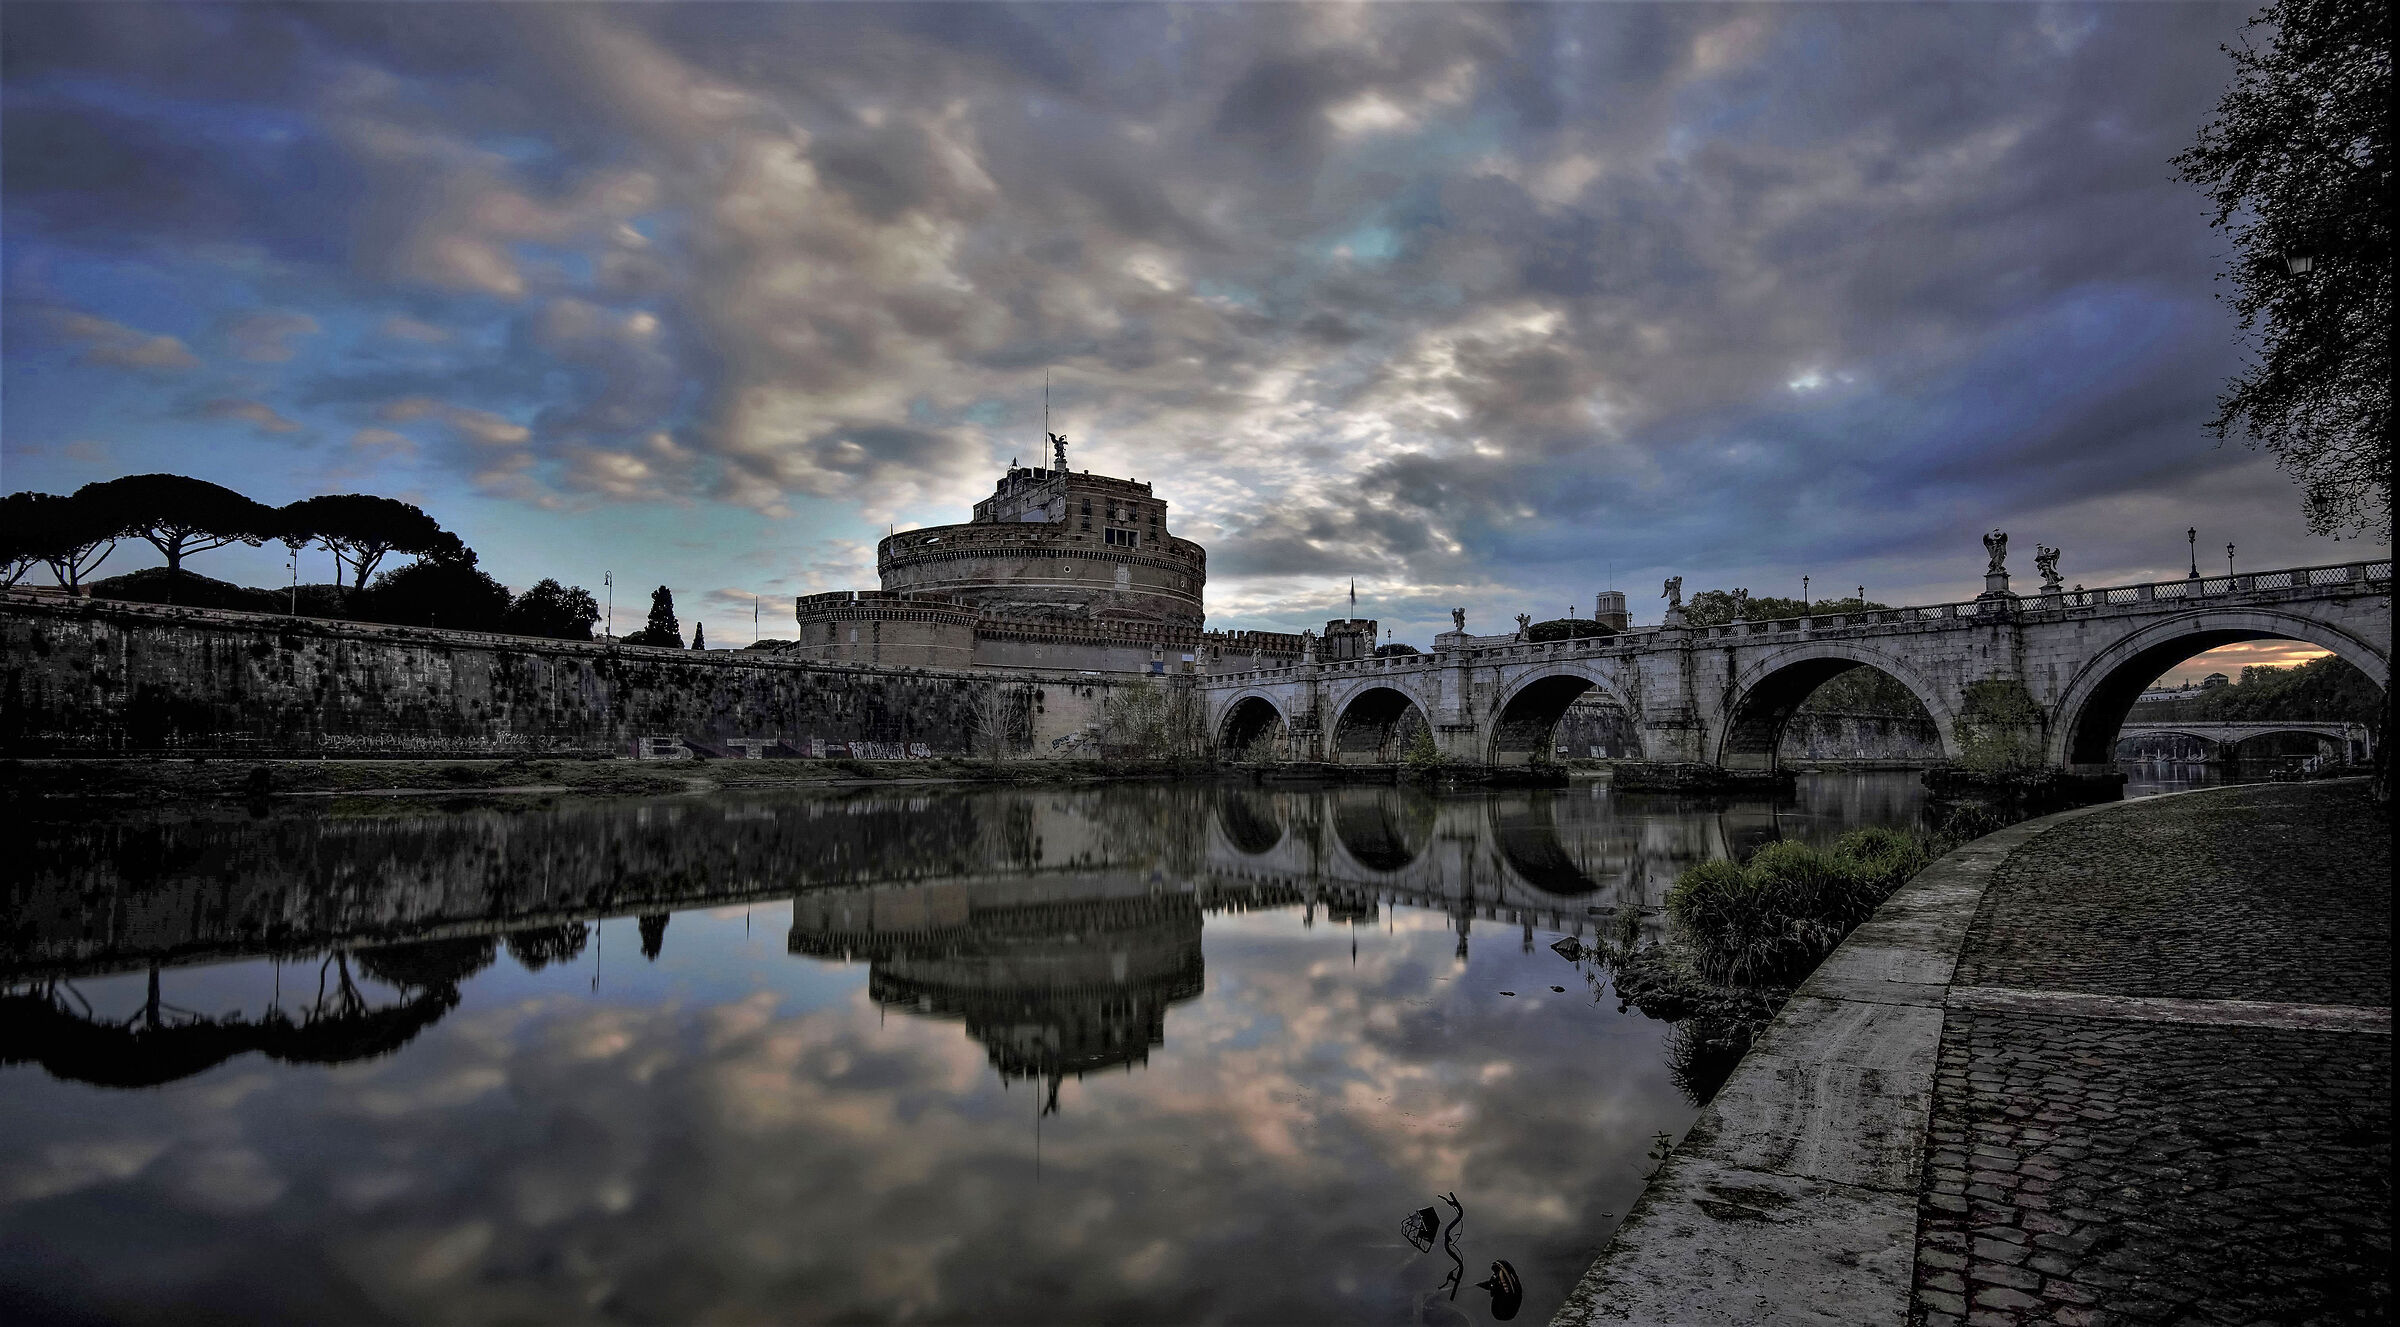 The Inespugnabile fortress of Rome: Castel Sant'Angelo...